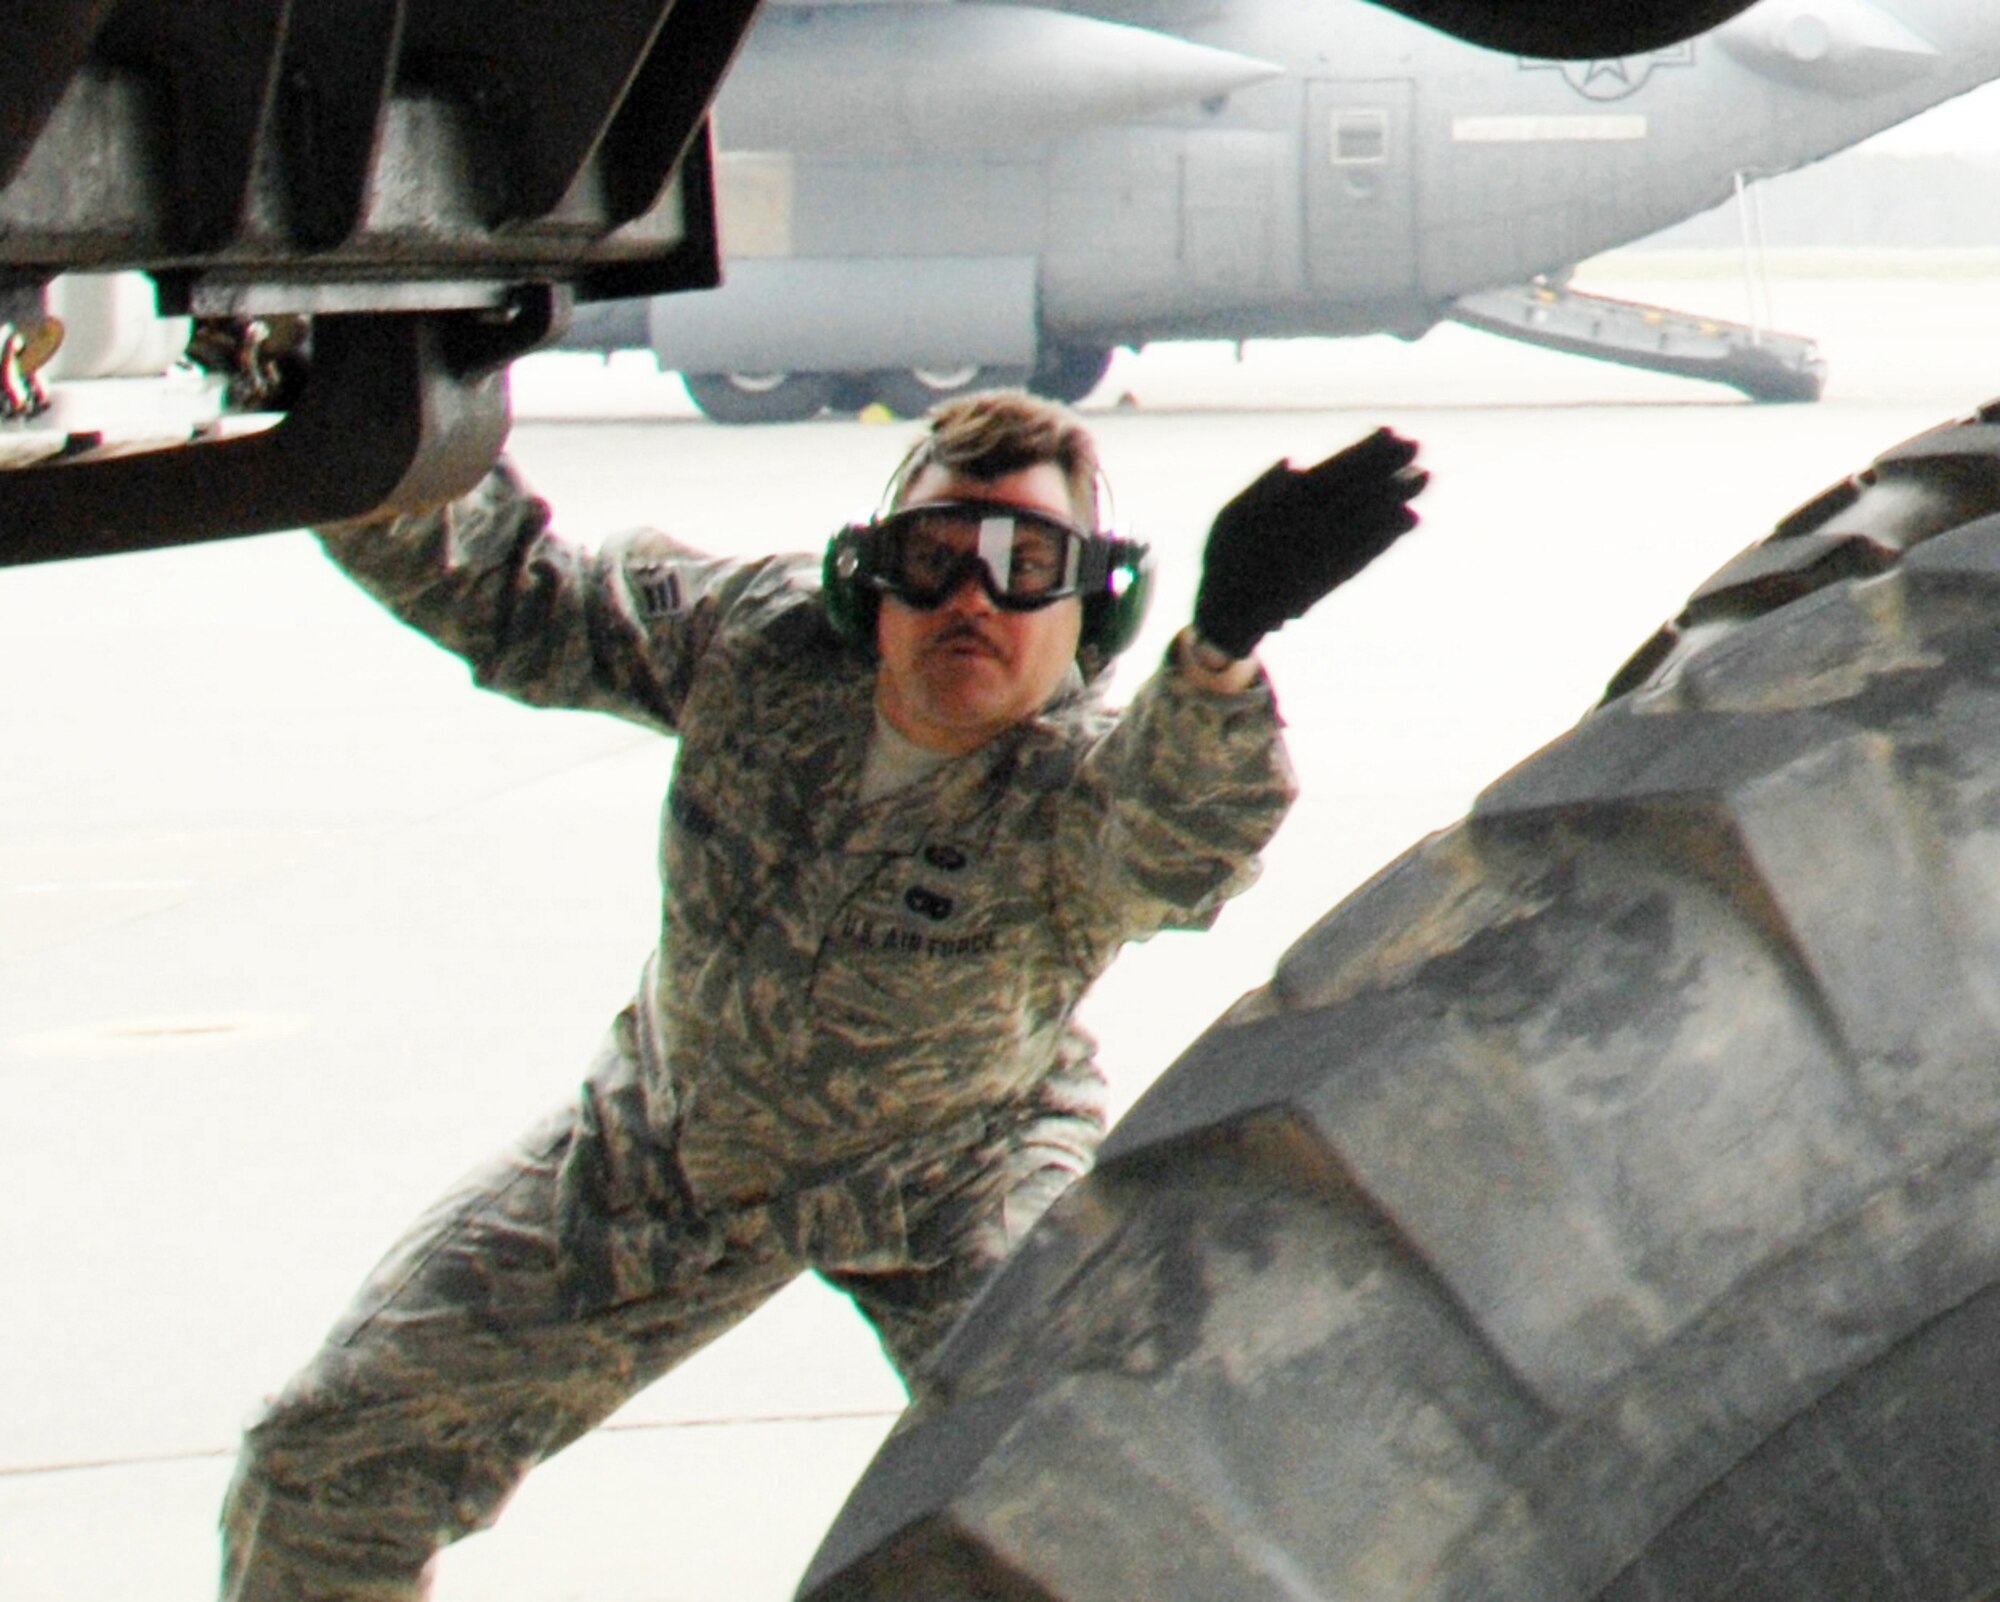 Senior Airman Michael Boehm, a member of the 32nd Aerial Port Squadron, guides a HUMVEE out of a C-130 aircraft in the engines running off/on load event during the 22nd Air Force?s Aerial Port Roundup at Dobbins Air Reserve Base, Ga., March 13-15, 2009. This was the first competition of its kind for the reservist from Pittsburgh International Airport Air Reserve Station, Pa. (U.S. Air Force photo/2nd Lt. J. Justin Pearce)